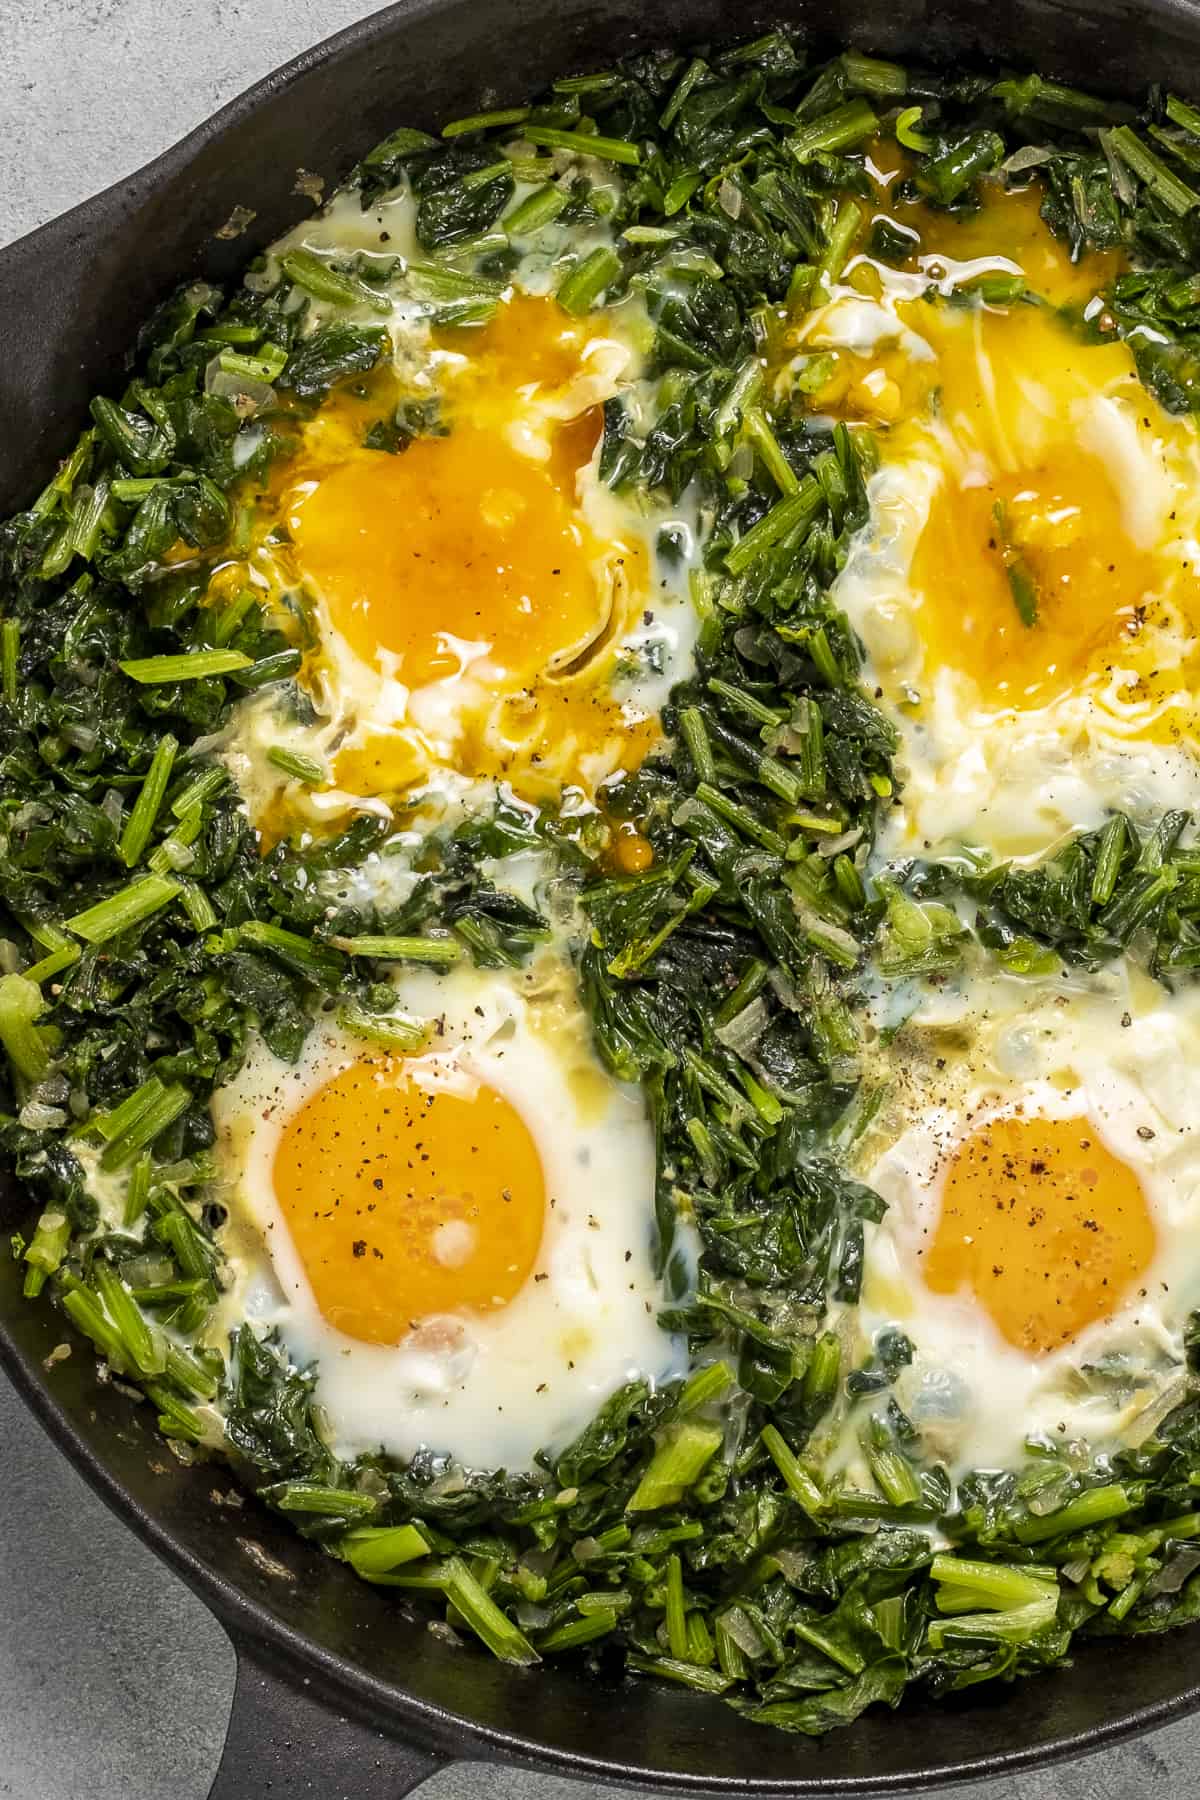 Spinach and 4 whole eggs cooked in a pan.